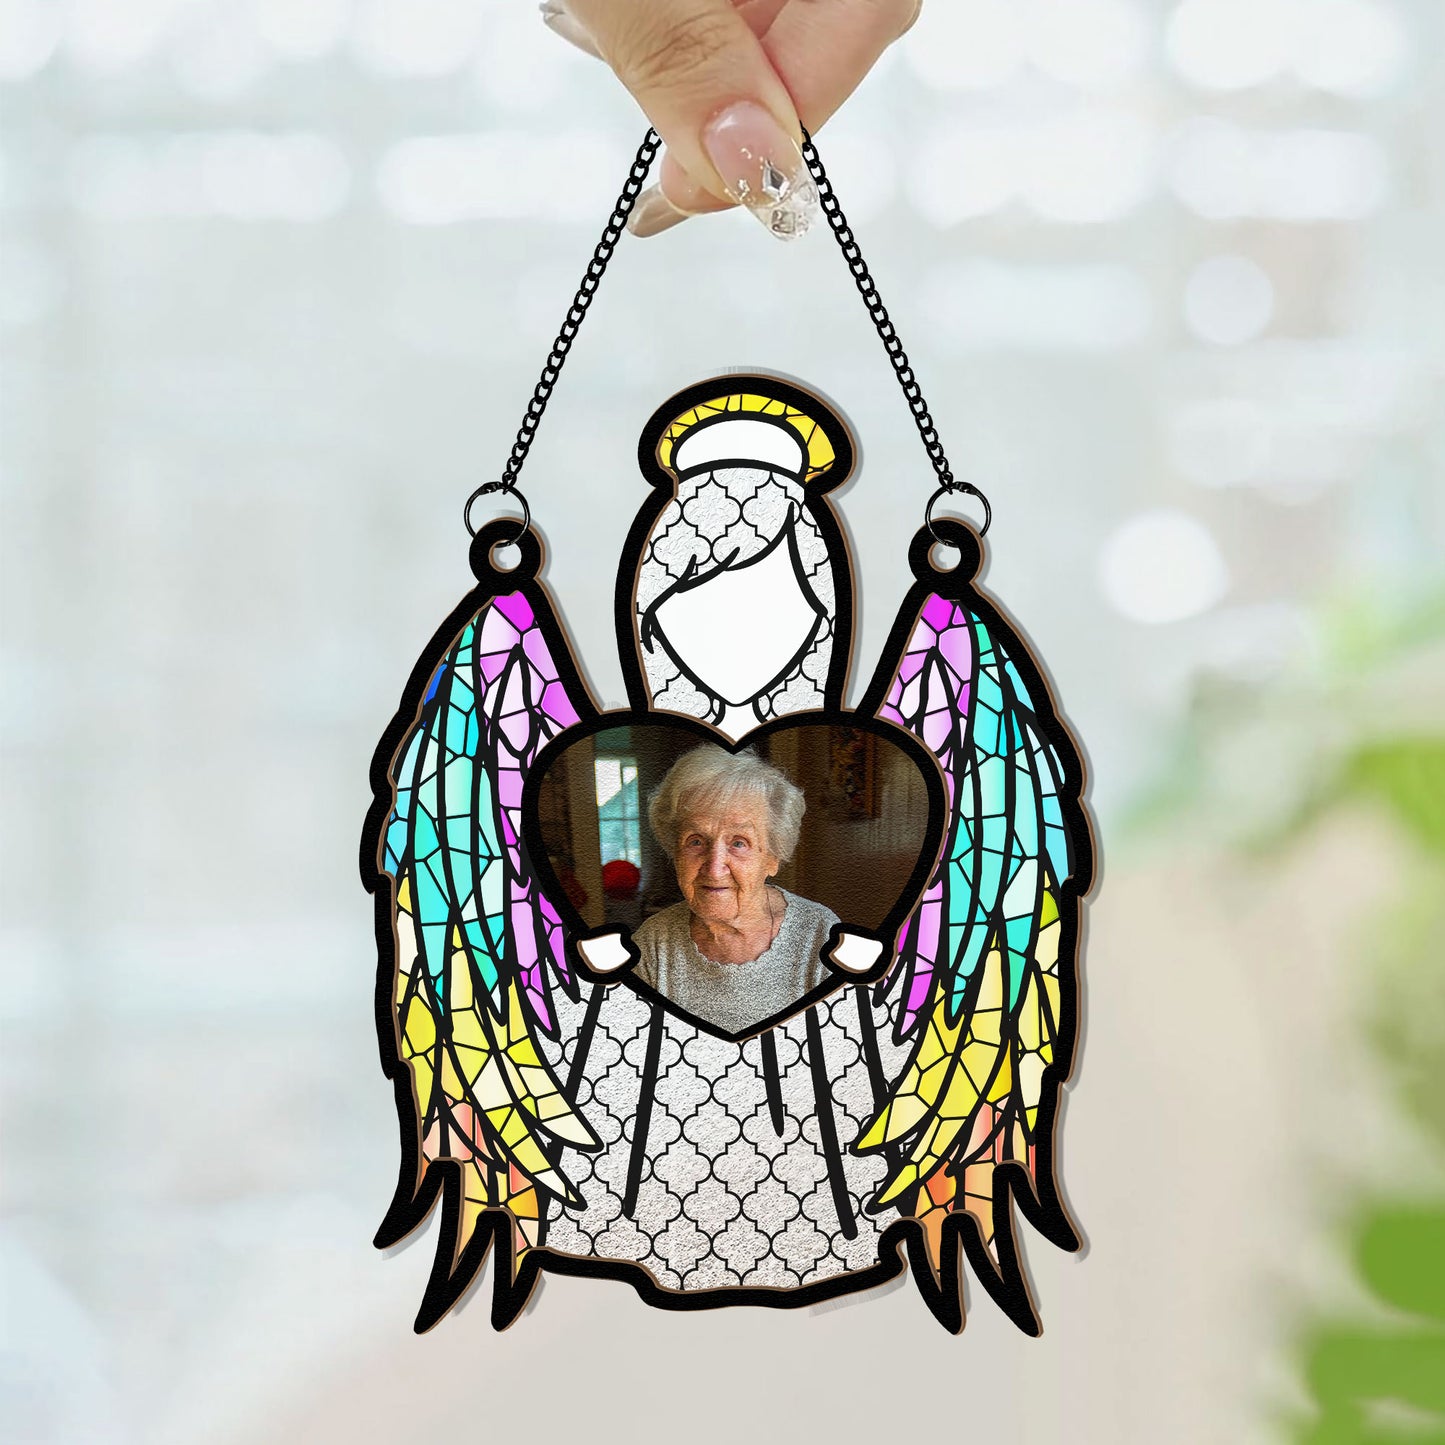 My Love Is With The Angel - Personalized Window Hanging Suncatcher Photo Ornament